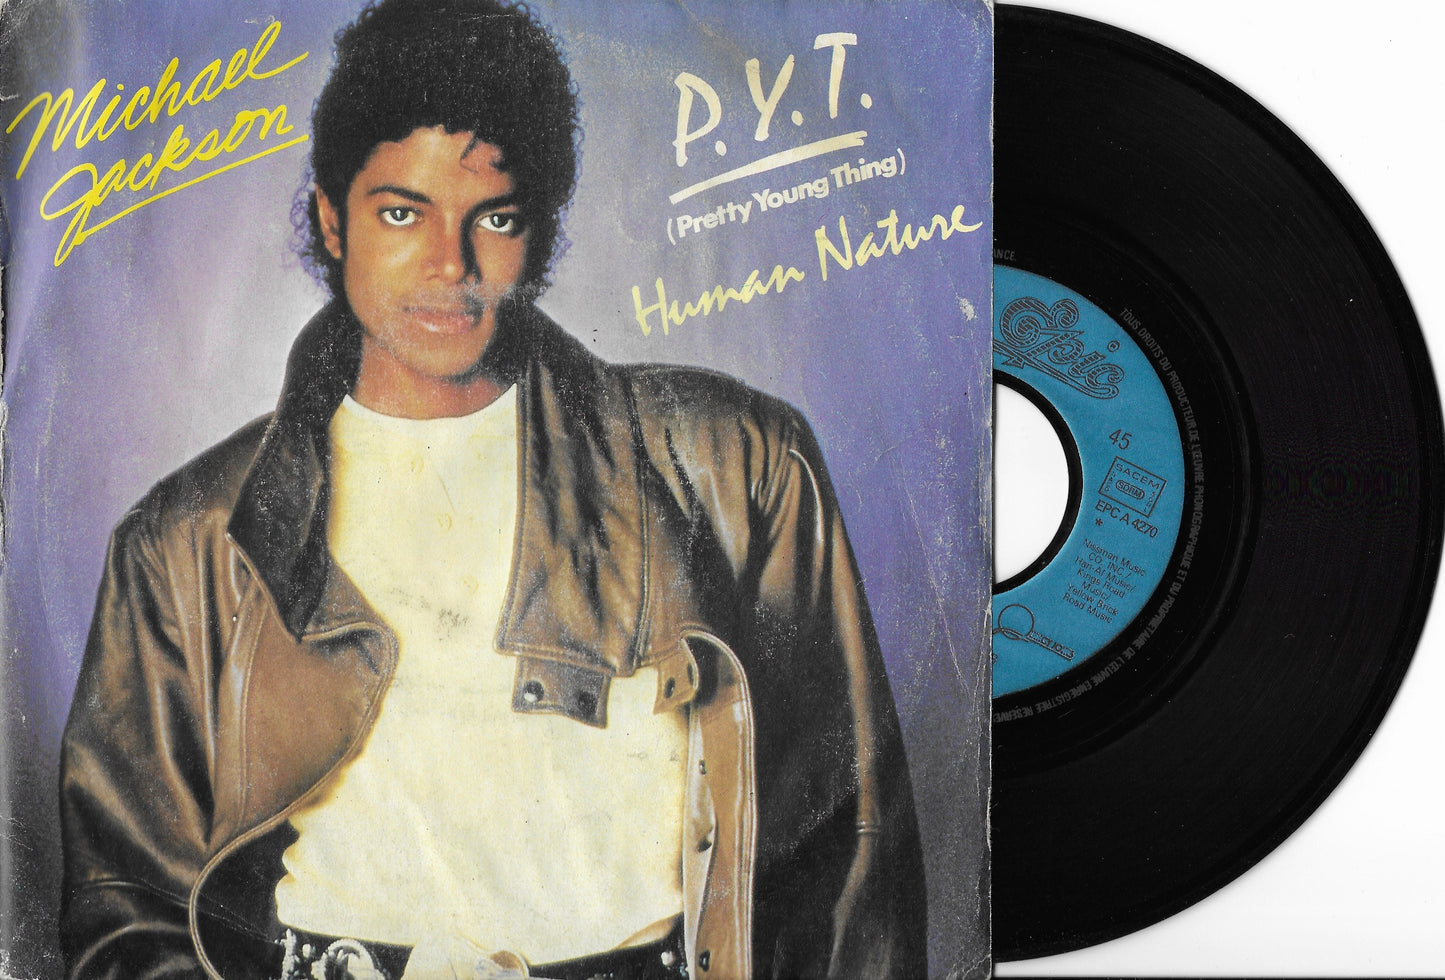 MICHAEL JACKSON - P.Y.T. (Pretty Young Thing)